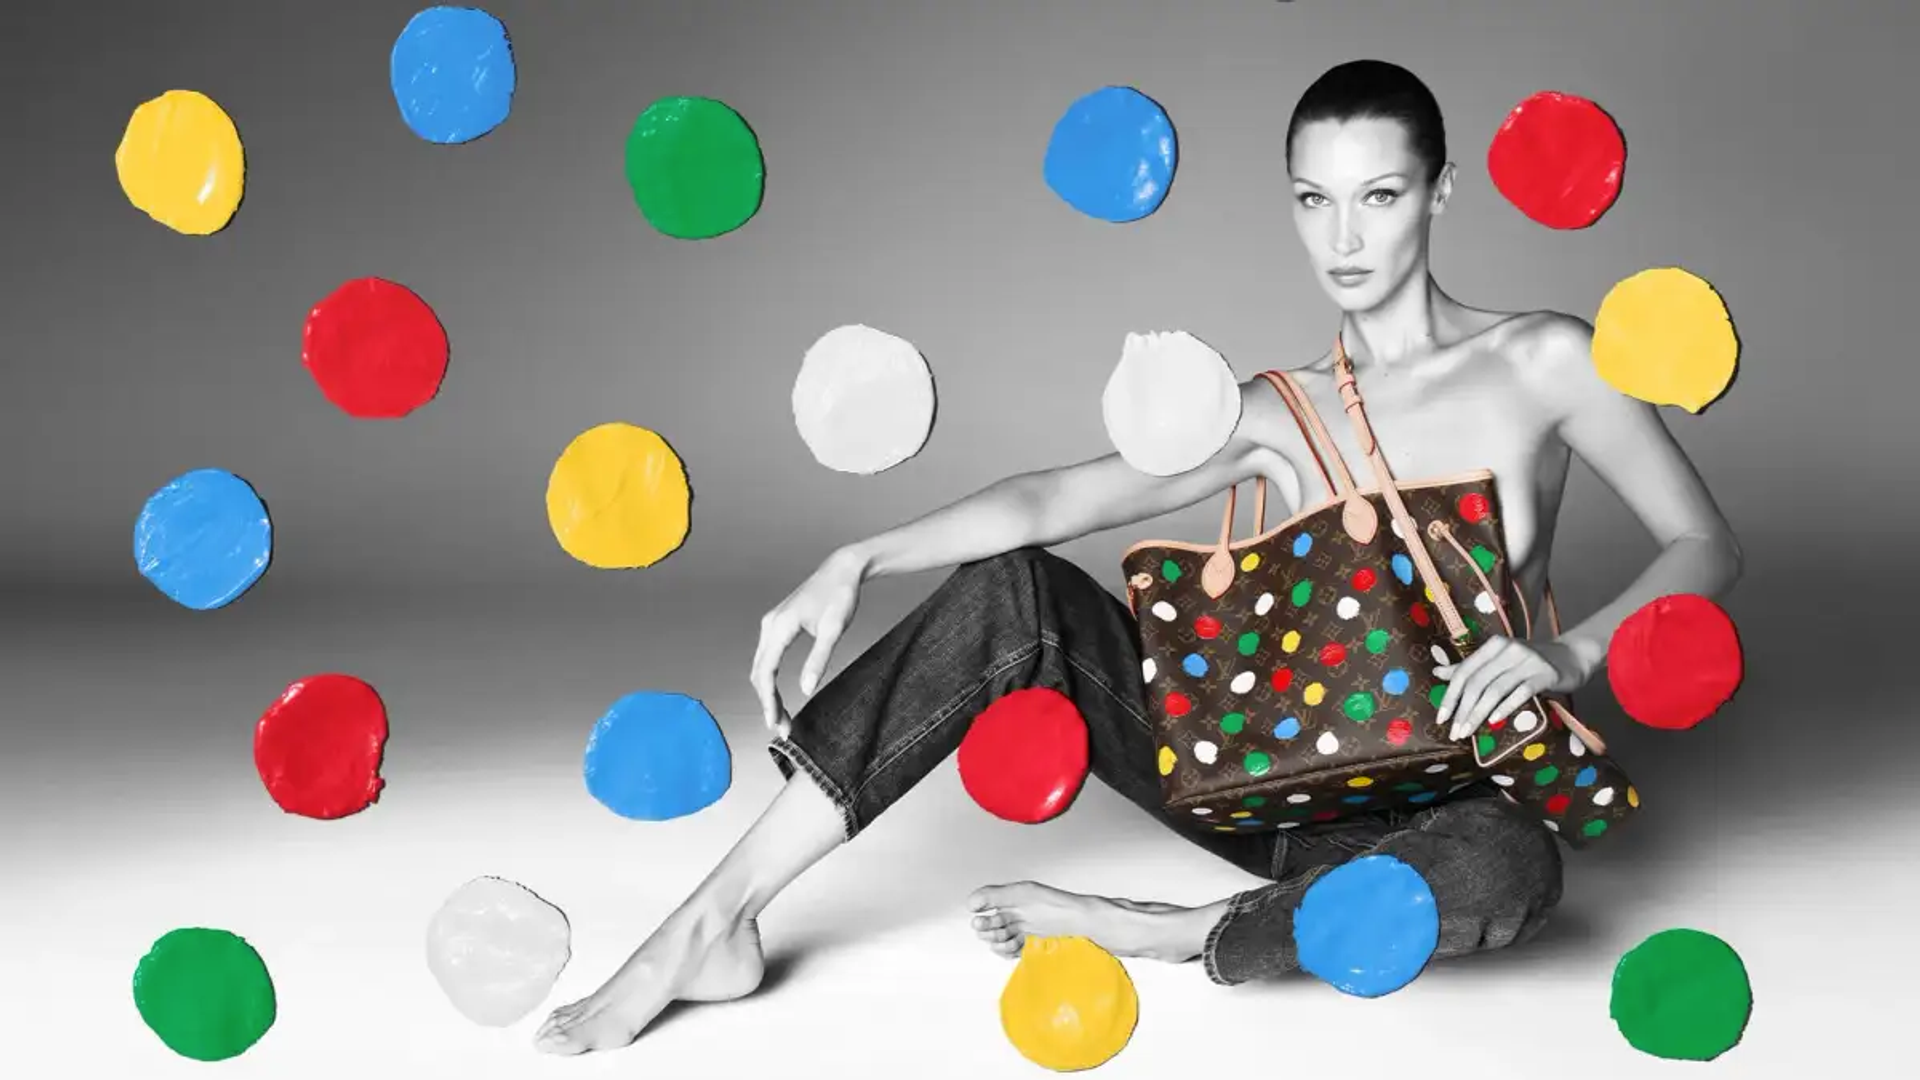 Is Louis Vuitton a wise financial decision, or should you invest